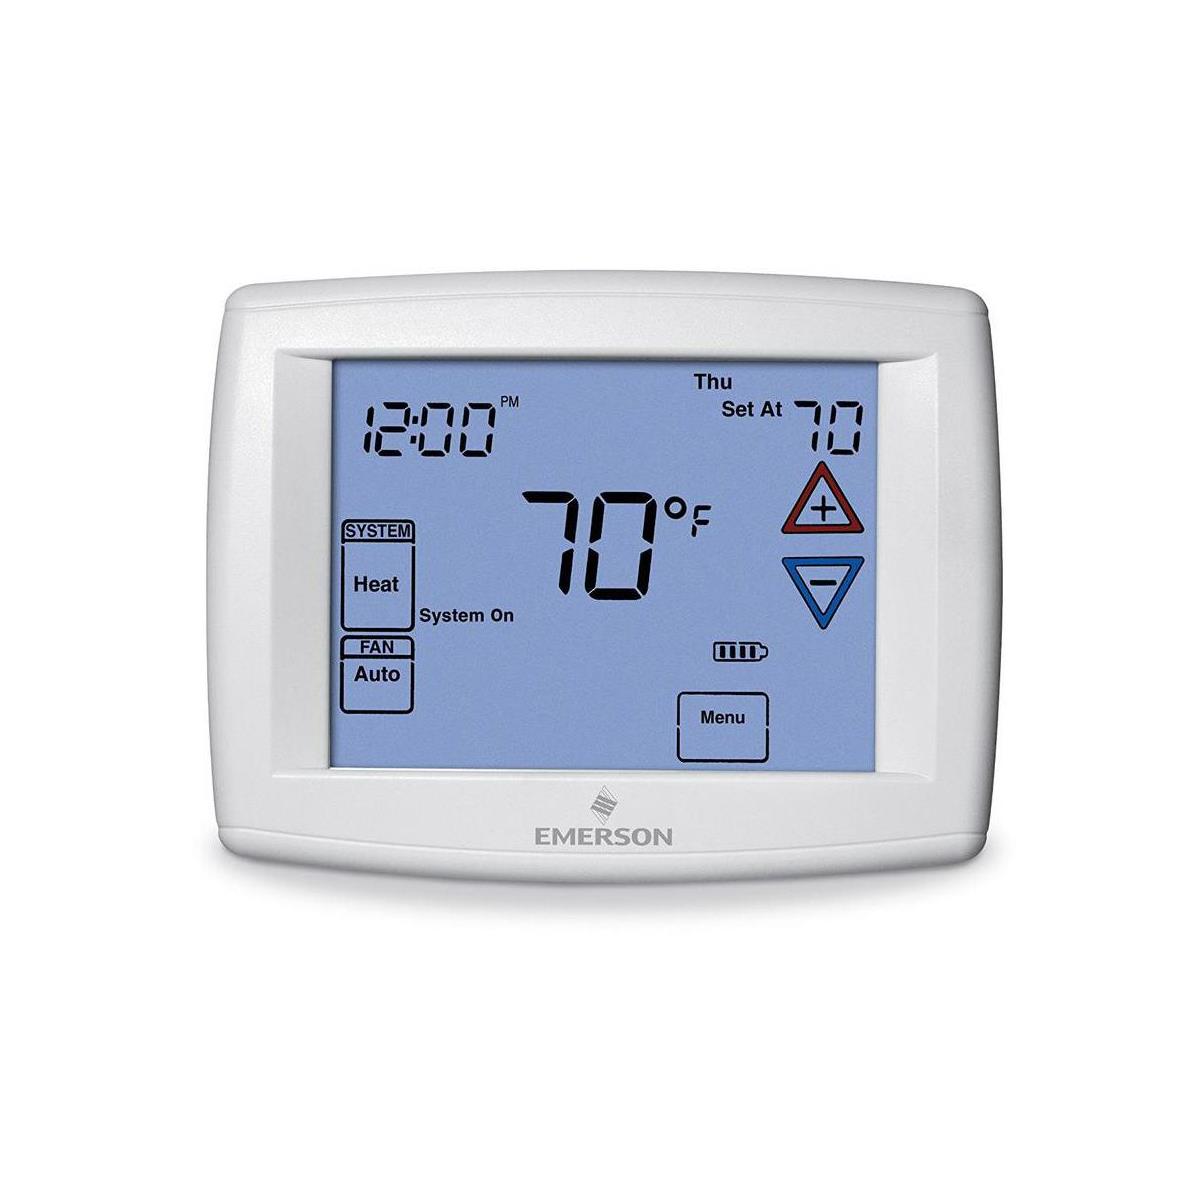 

Emerson Electric Blue 7 Day Programmable Digital Touch Thermostat